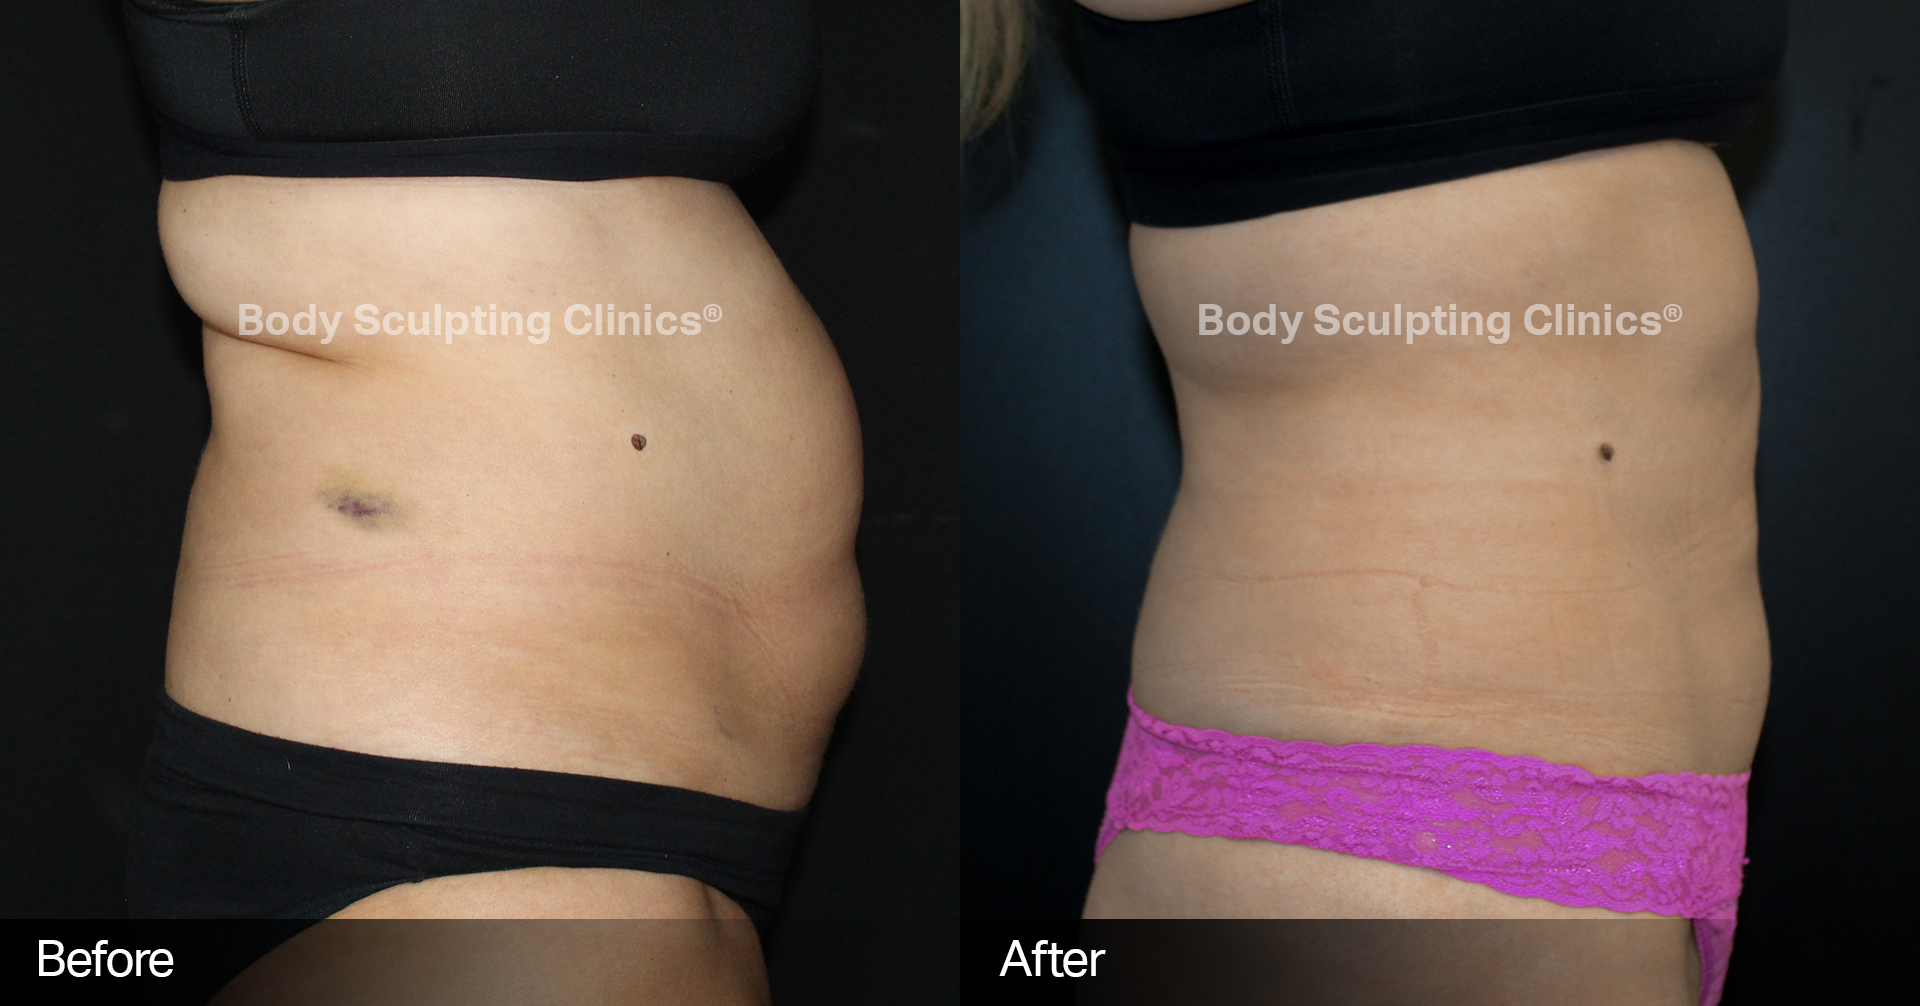 If you have a diastasis recti (split in your abs) should you do